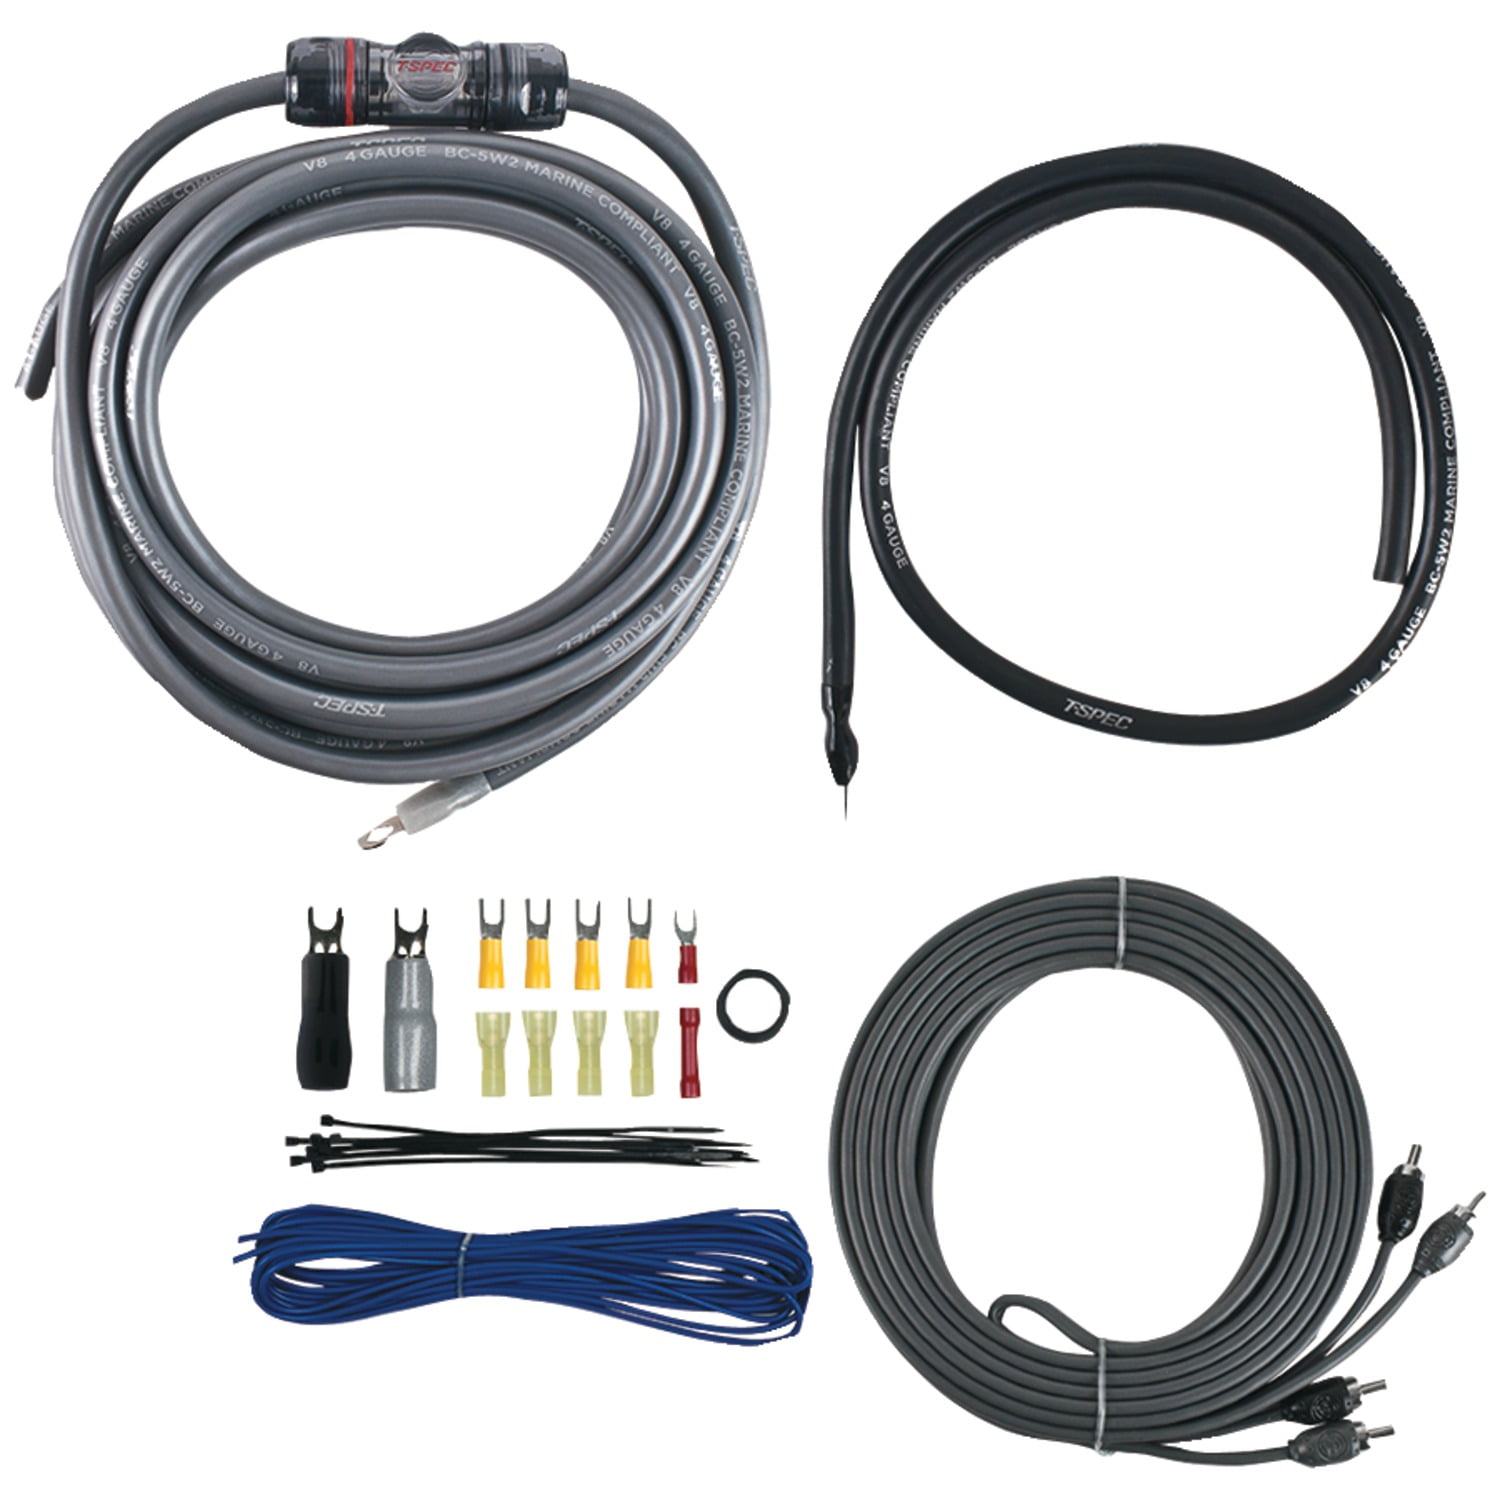 YiePhiot in Wall Cable Management Kit - TV Cord Hider for Wall